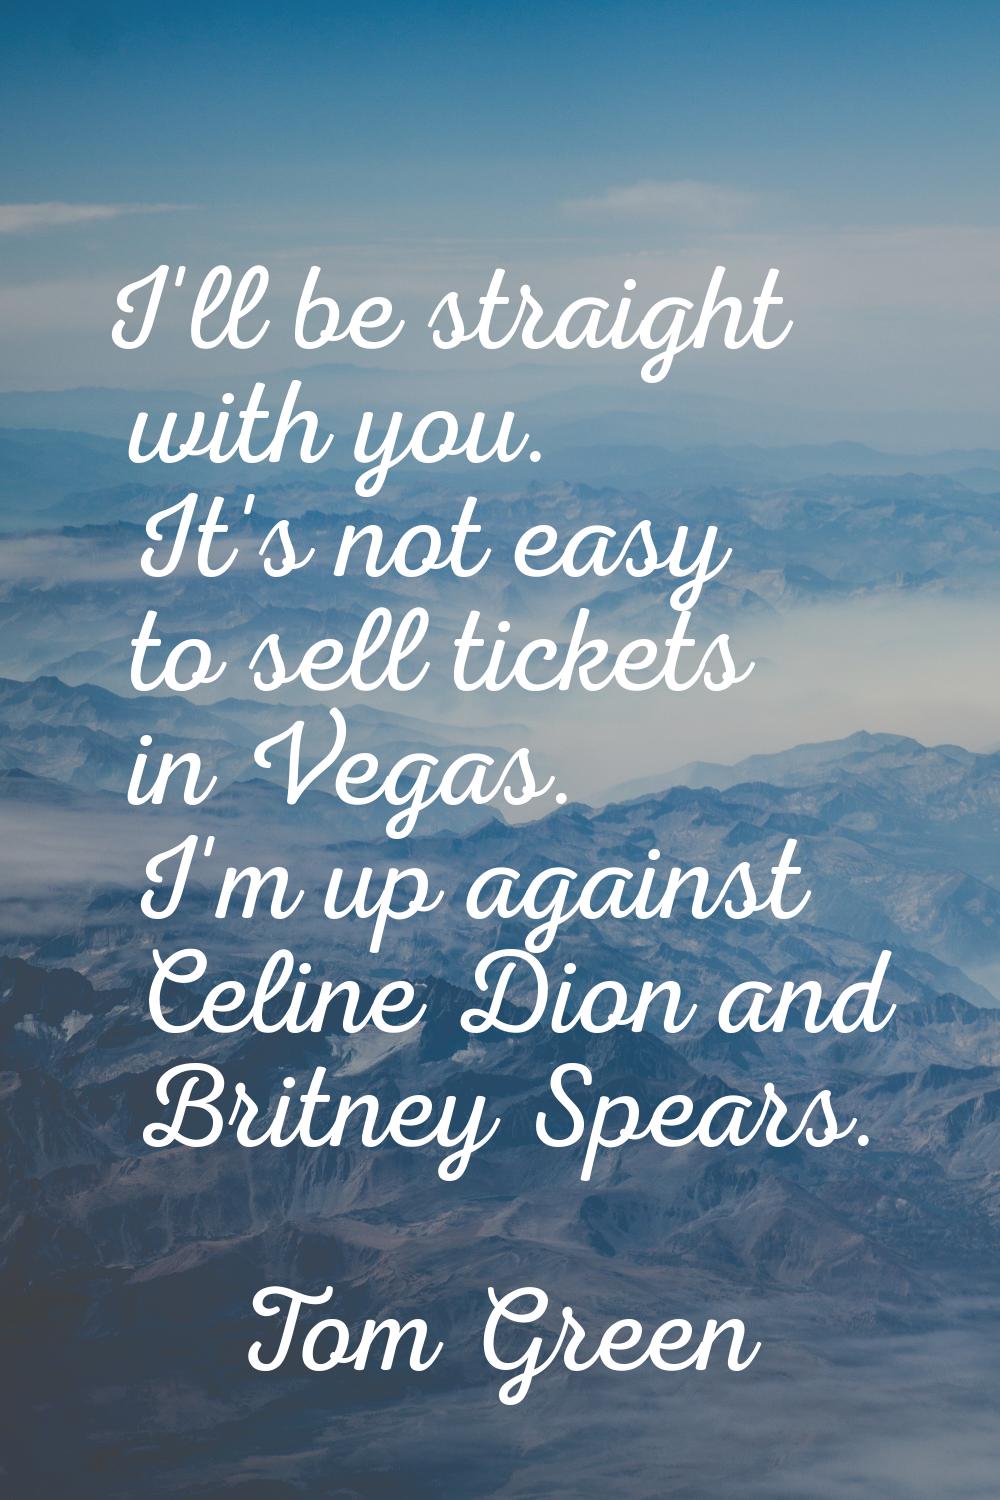 I'll be straight with you. It's not easy to sell tickets in Vegas. I'm up against Celine Dion and B